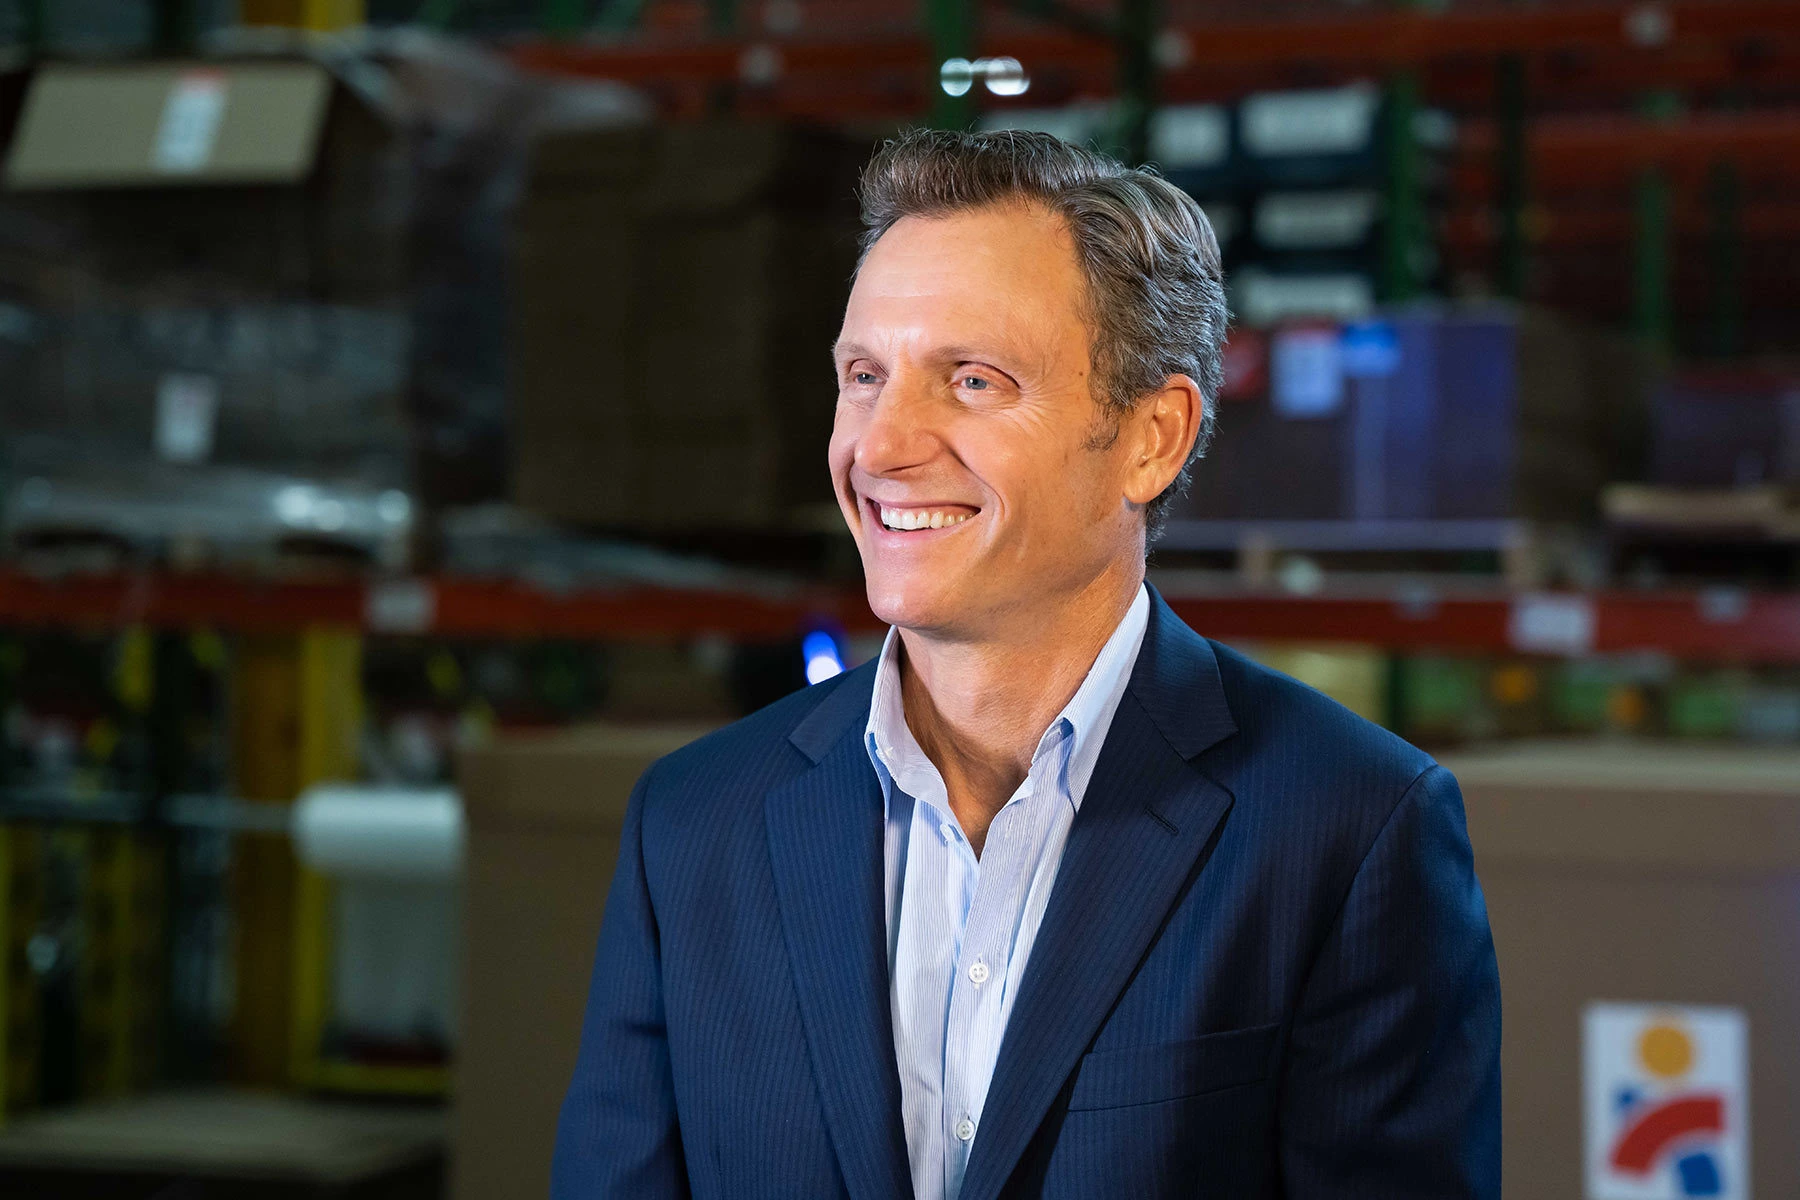 Actor and Americares Board Member Tony Goldwyn co-hosts the Americares Airlift Benefit Livestream at Americares Global Distribution Center in Connecticut on Oct. 2, 2021. Photo by Mike Demas/Americares.